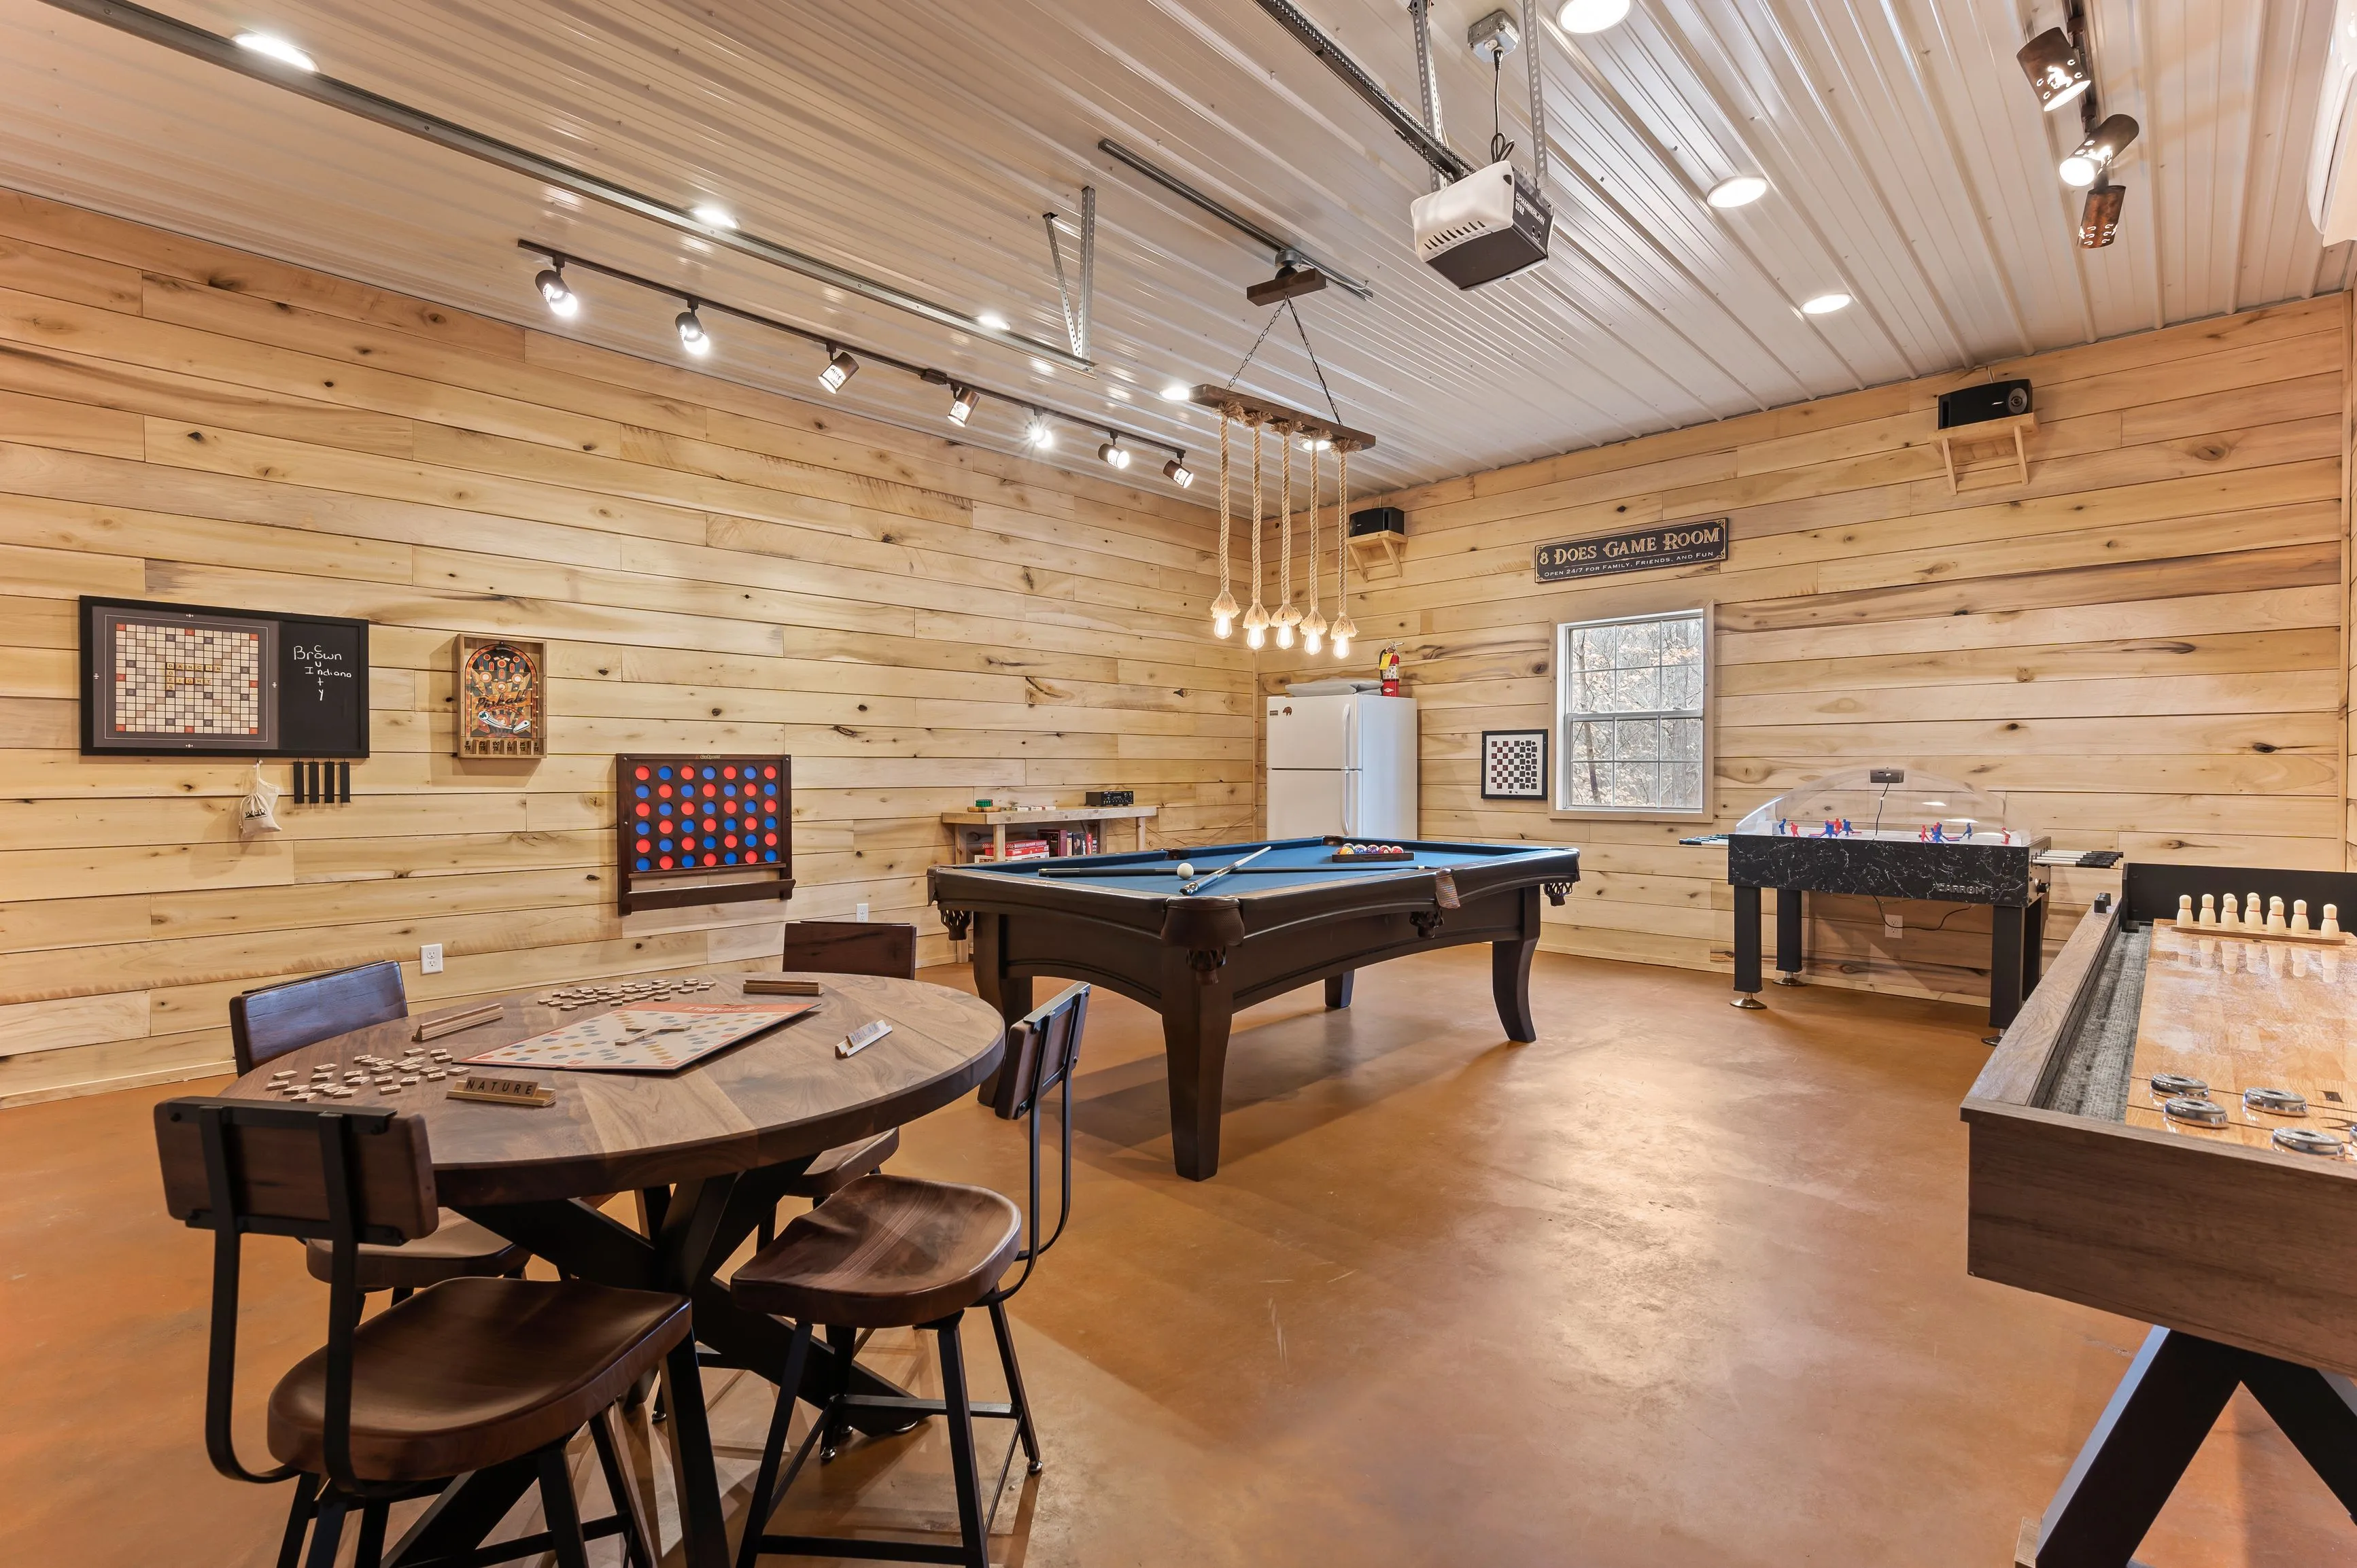 Spacious game room with wooden walls featuring a pool table, foosball, board games, and a unique hanging light fixture.